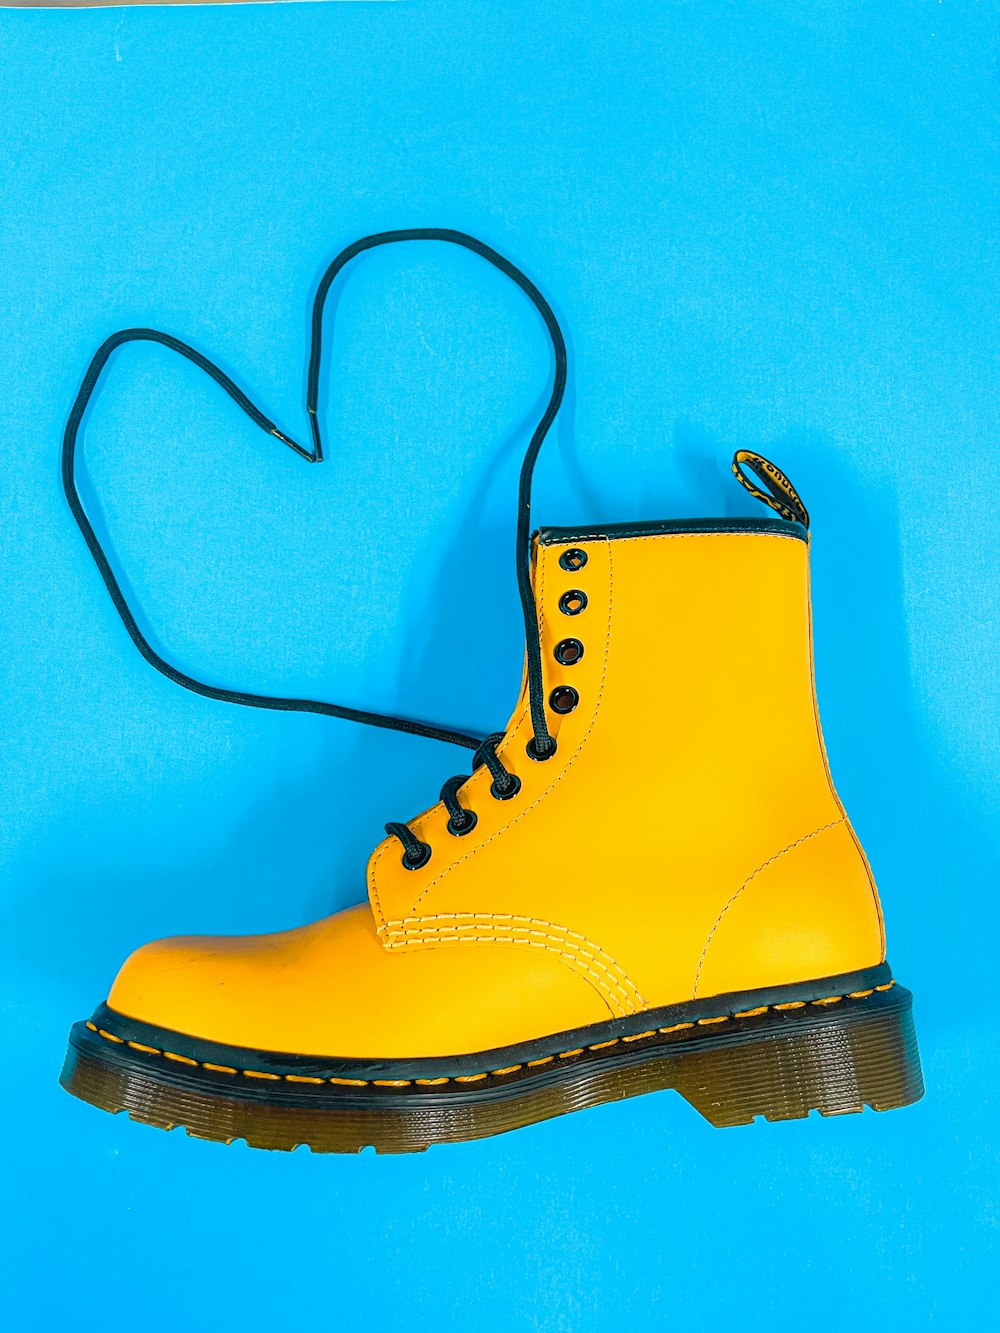 a pair of yellow boots on a blue background